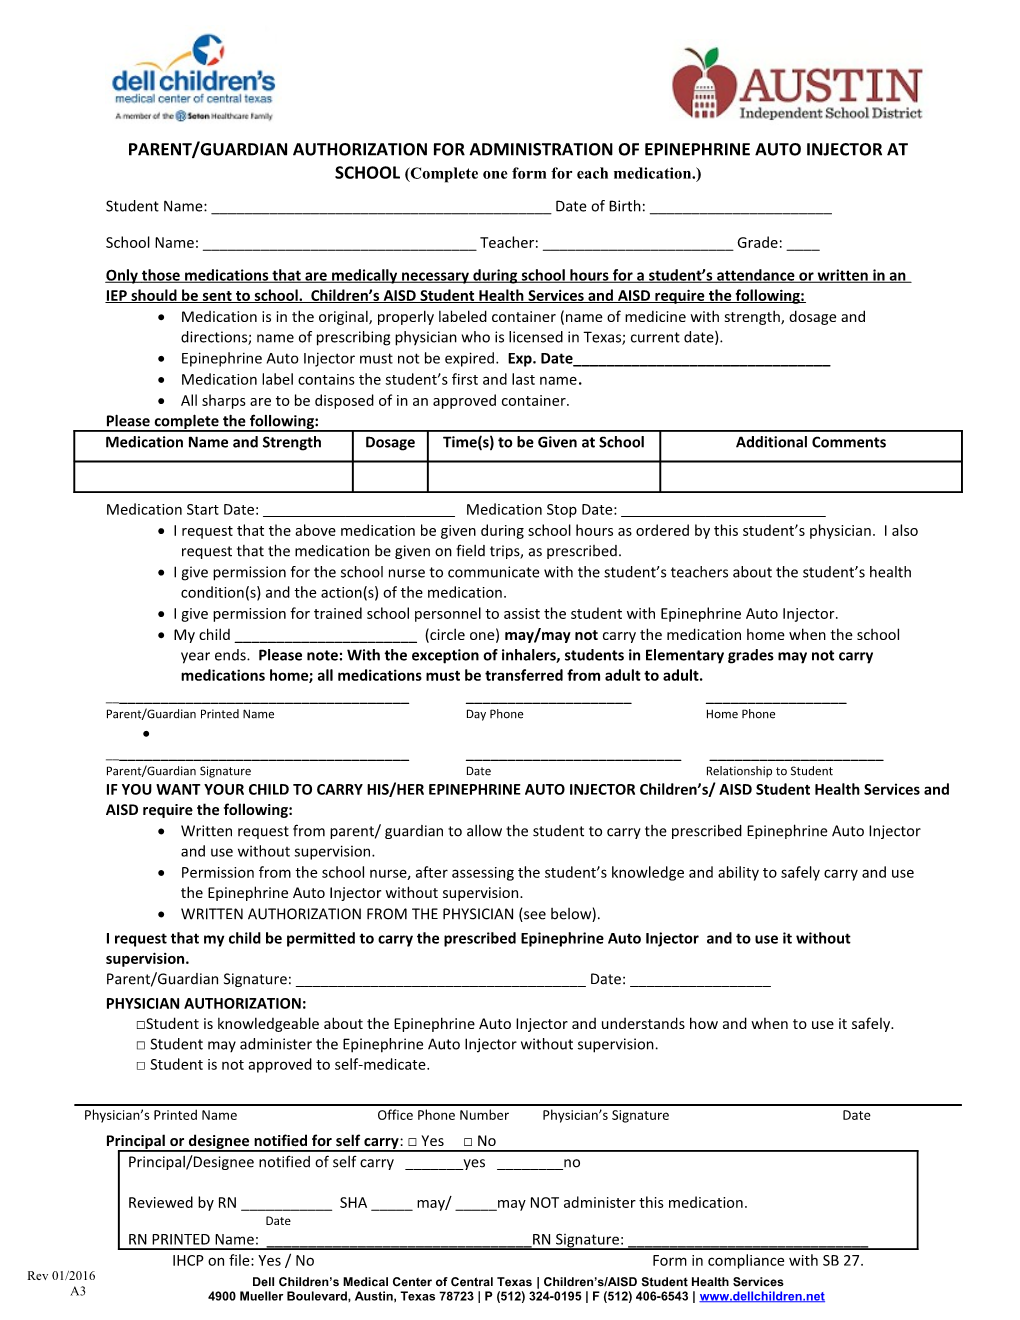 Parent/Guardian Authorization for Administration of Epinephrine Auto Injector at School